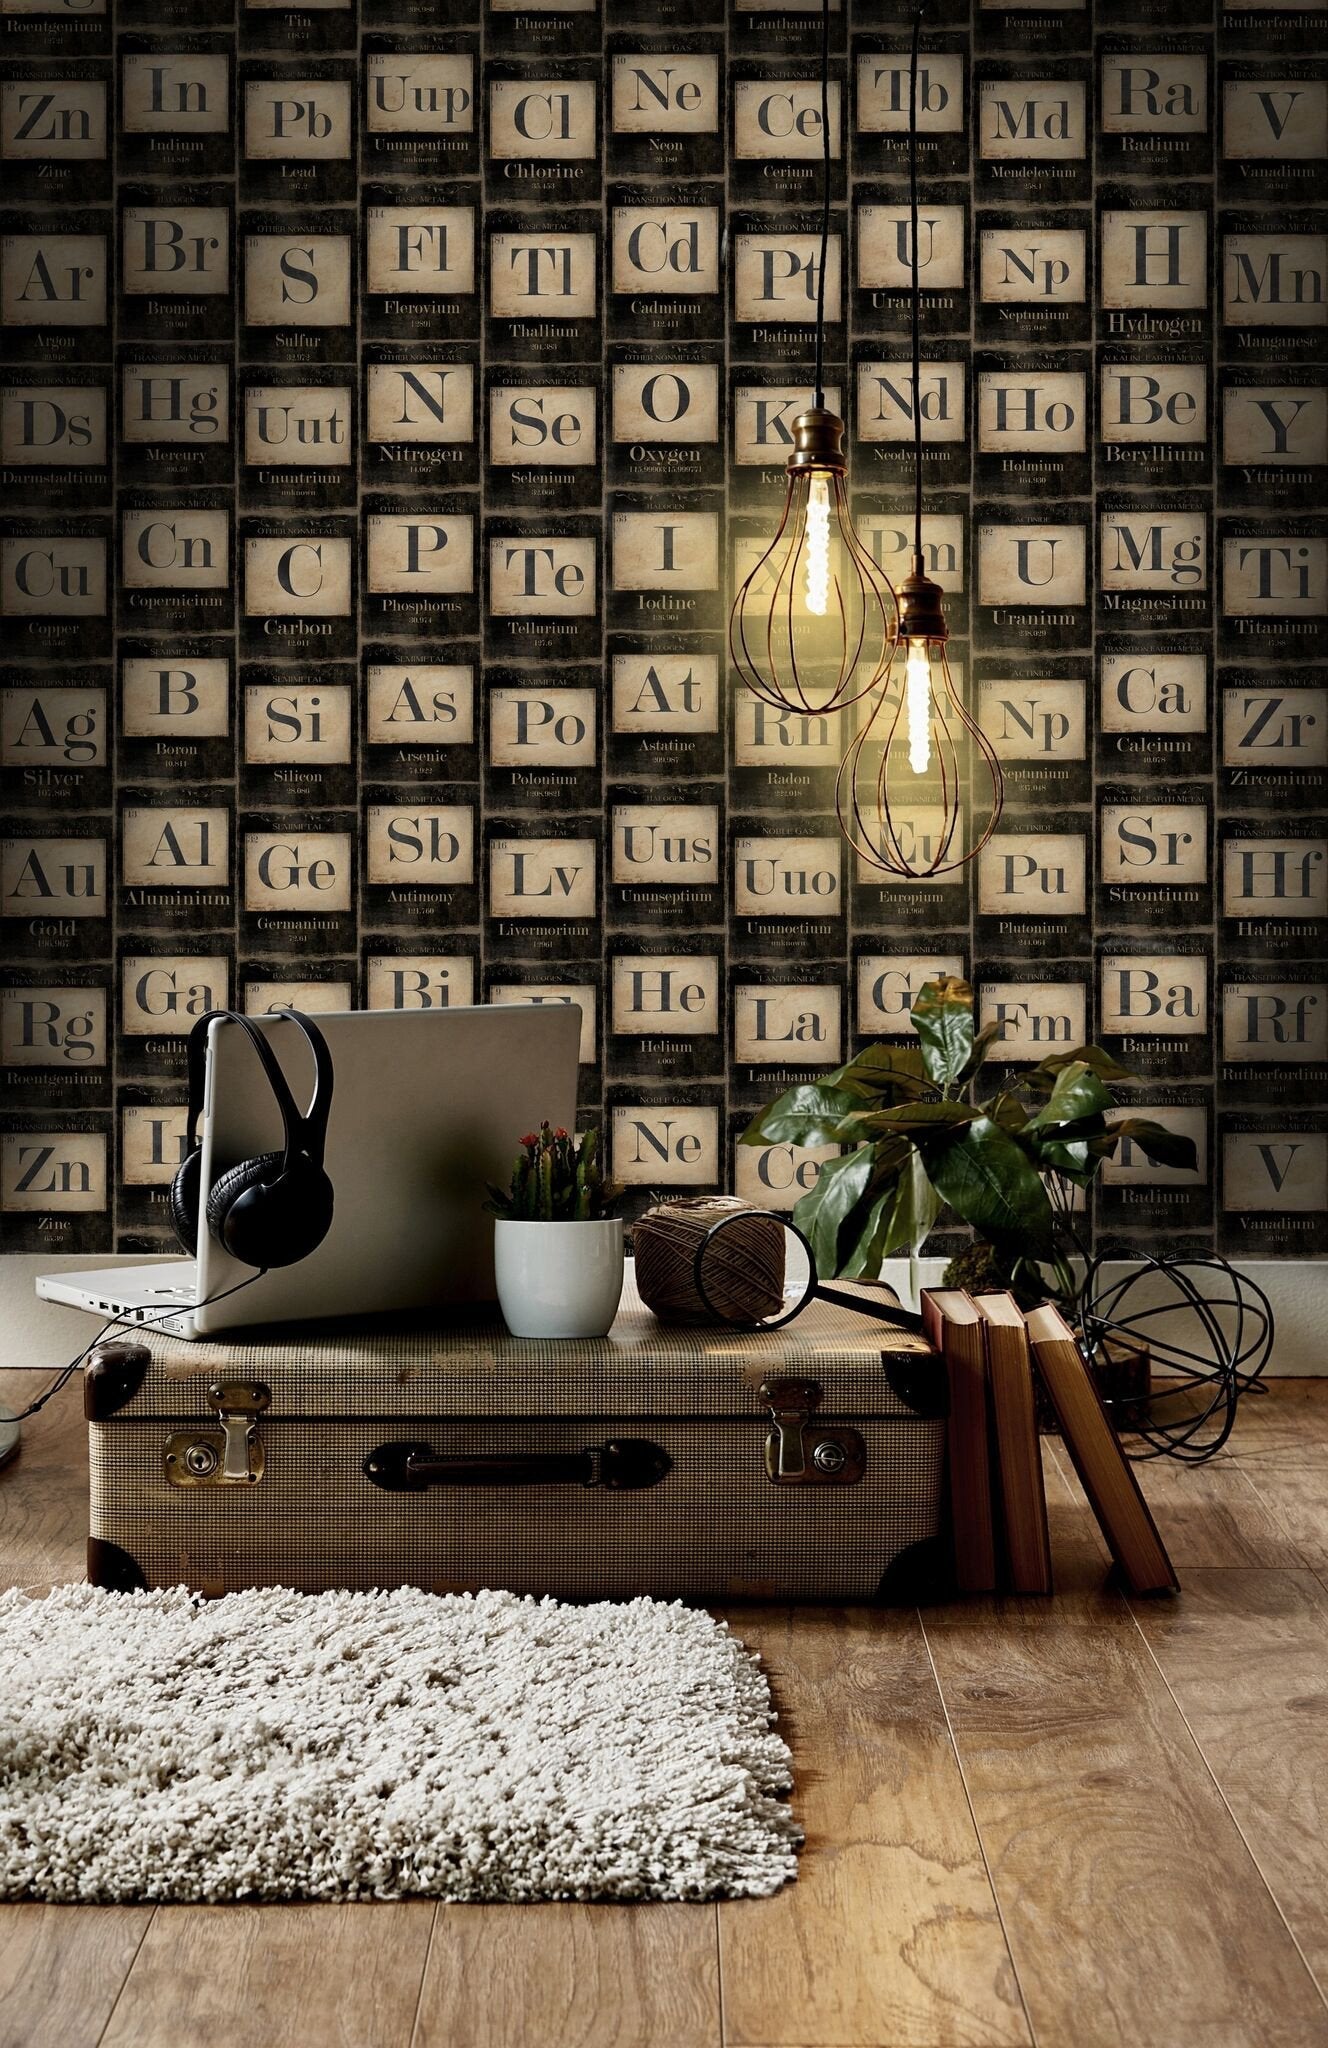 Periodic Table Of Elements Wallpaper-Mind The Gap-Contract Furniture Store